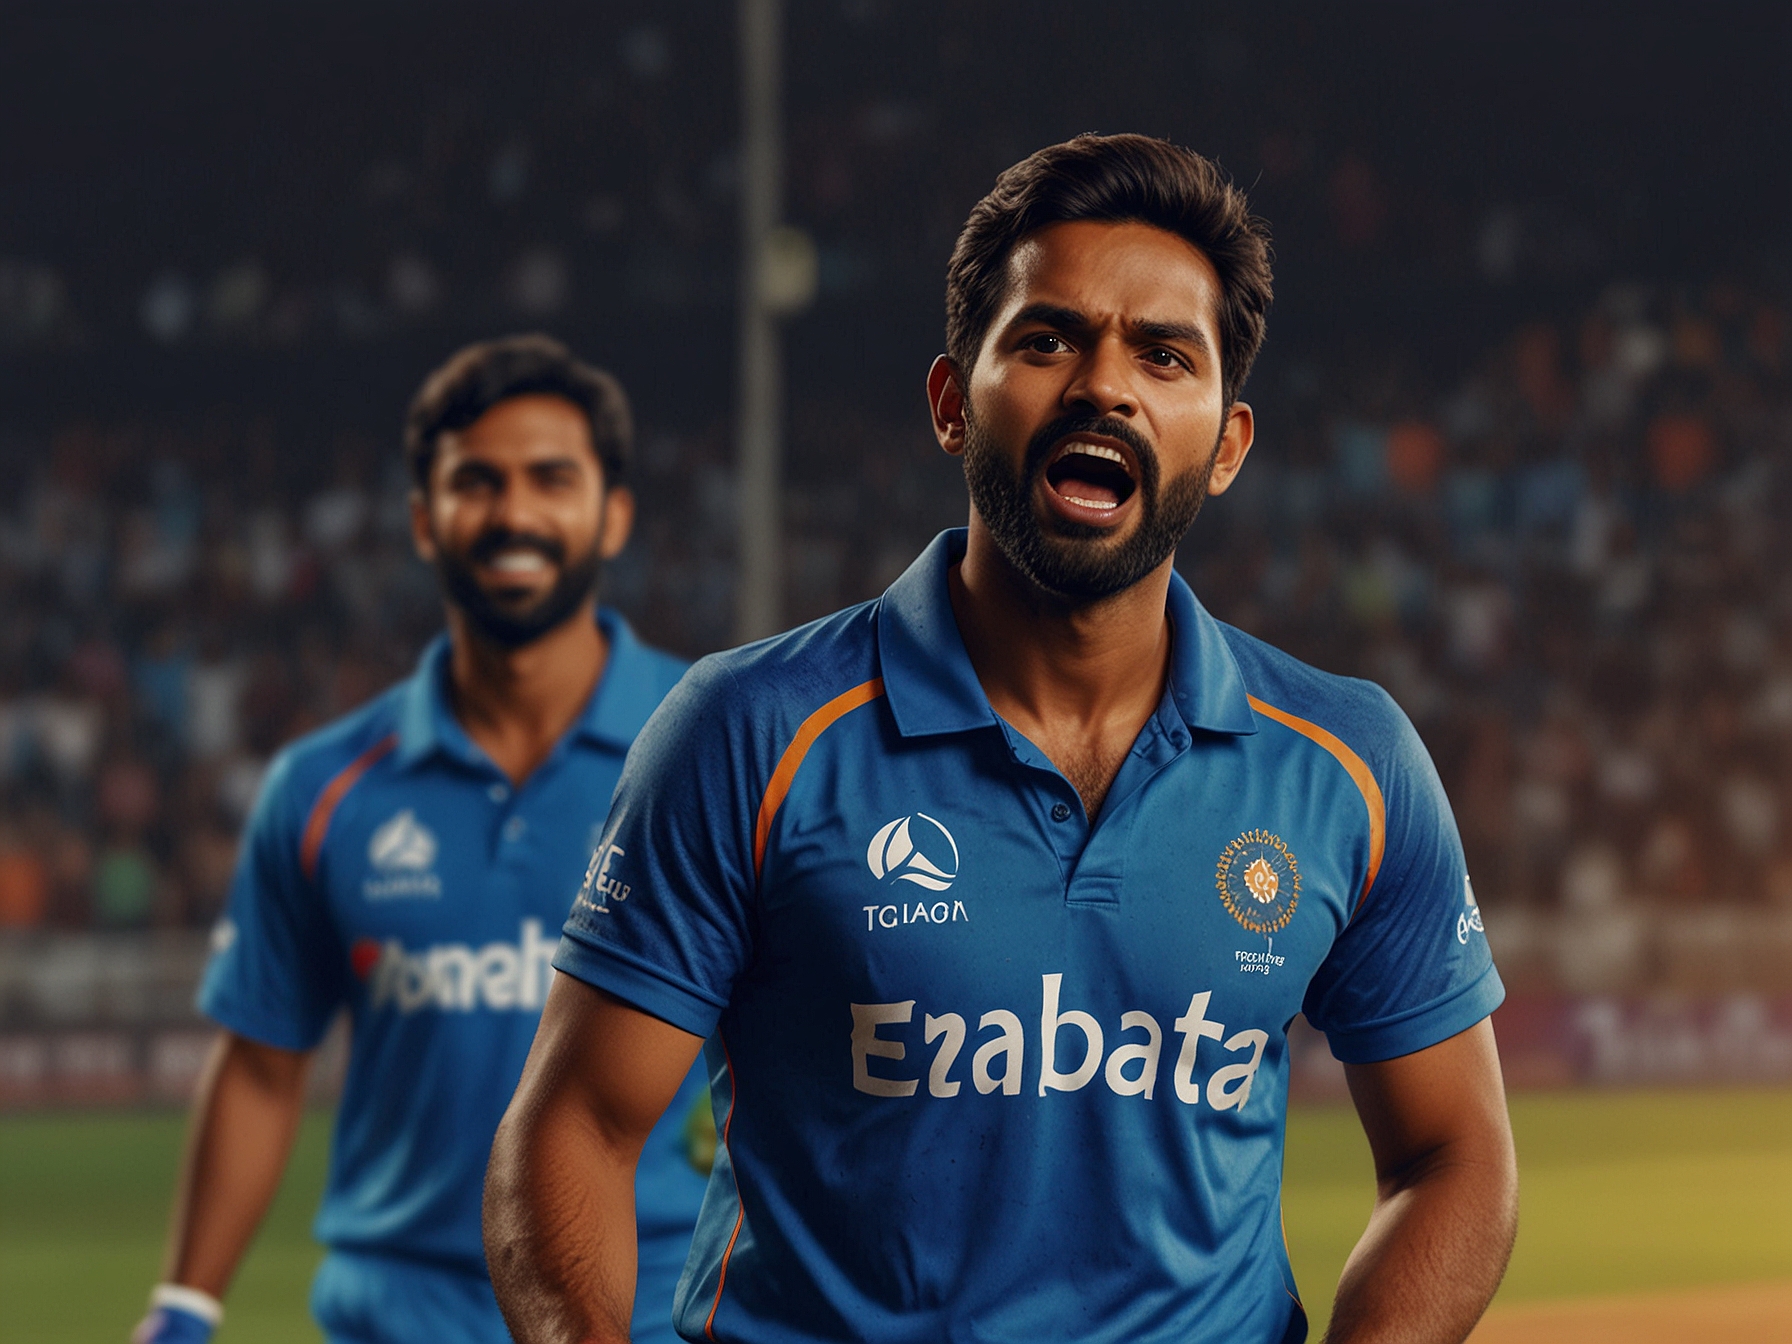 India’s dynamic captain rallies his team during a critical moment in the T20 World Cup 2024 match against Bangladesh in Antigua, with fans eagerly watching the high-stakes contest.